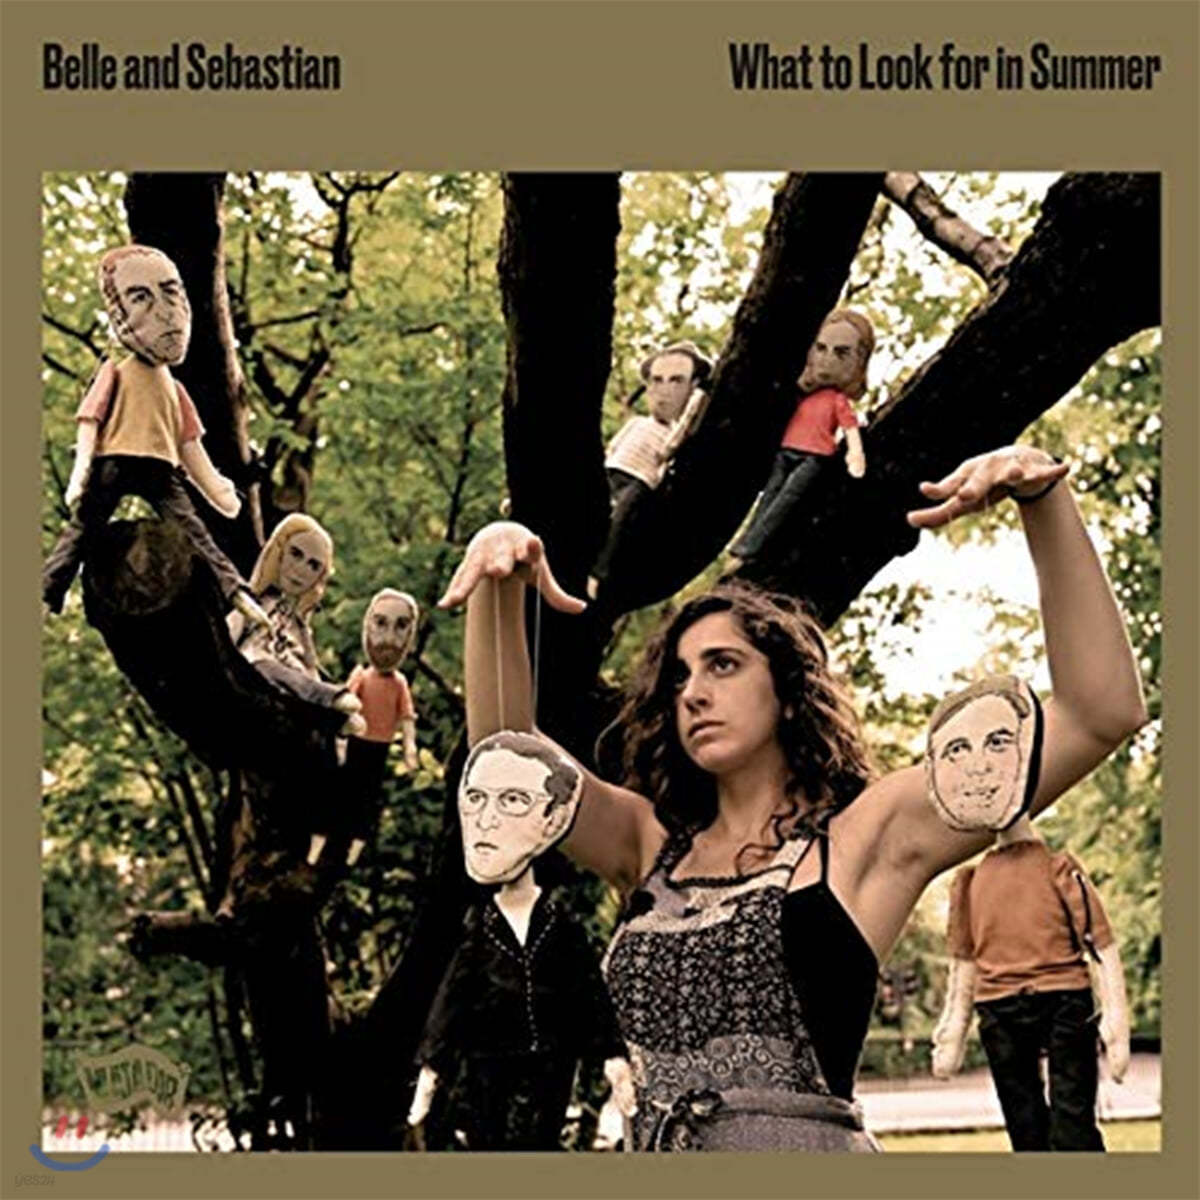 Belle and Sebastian (벨 앤 세바스찬) - What to Look for in Summer